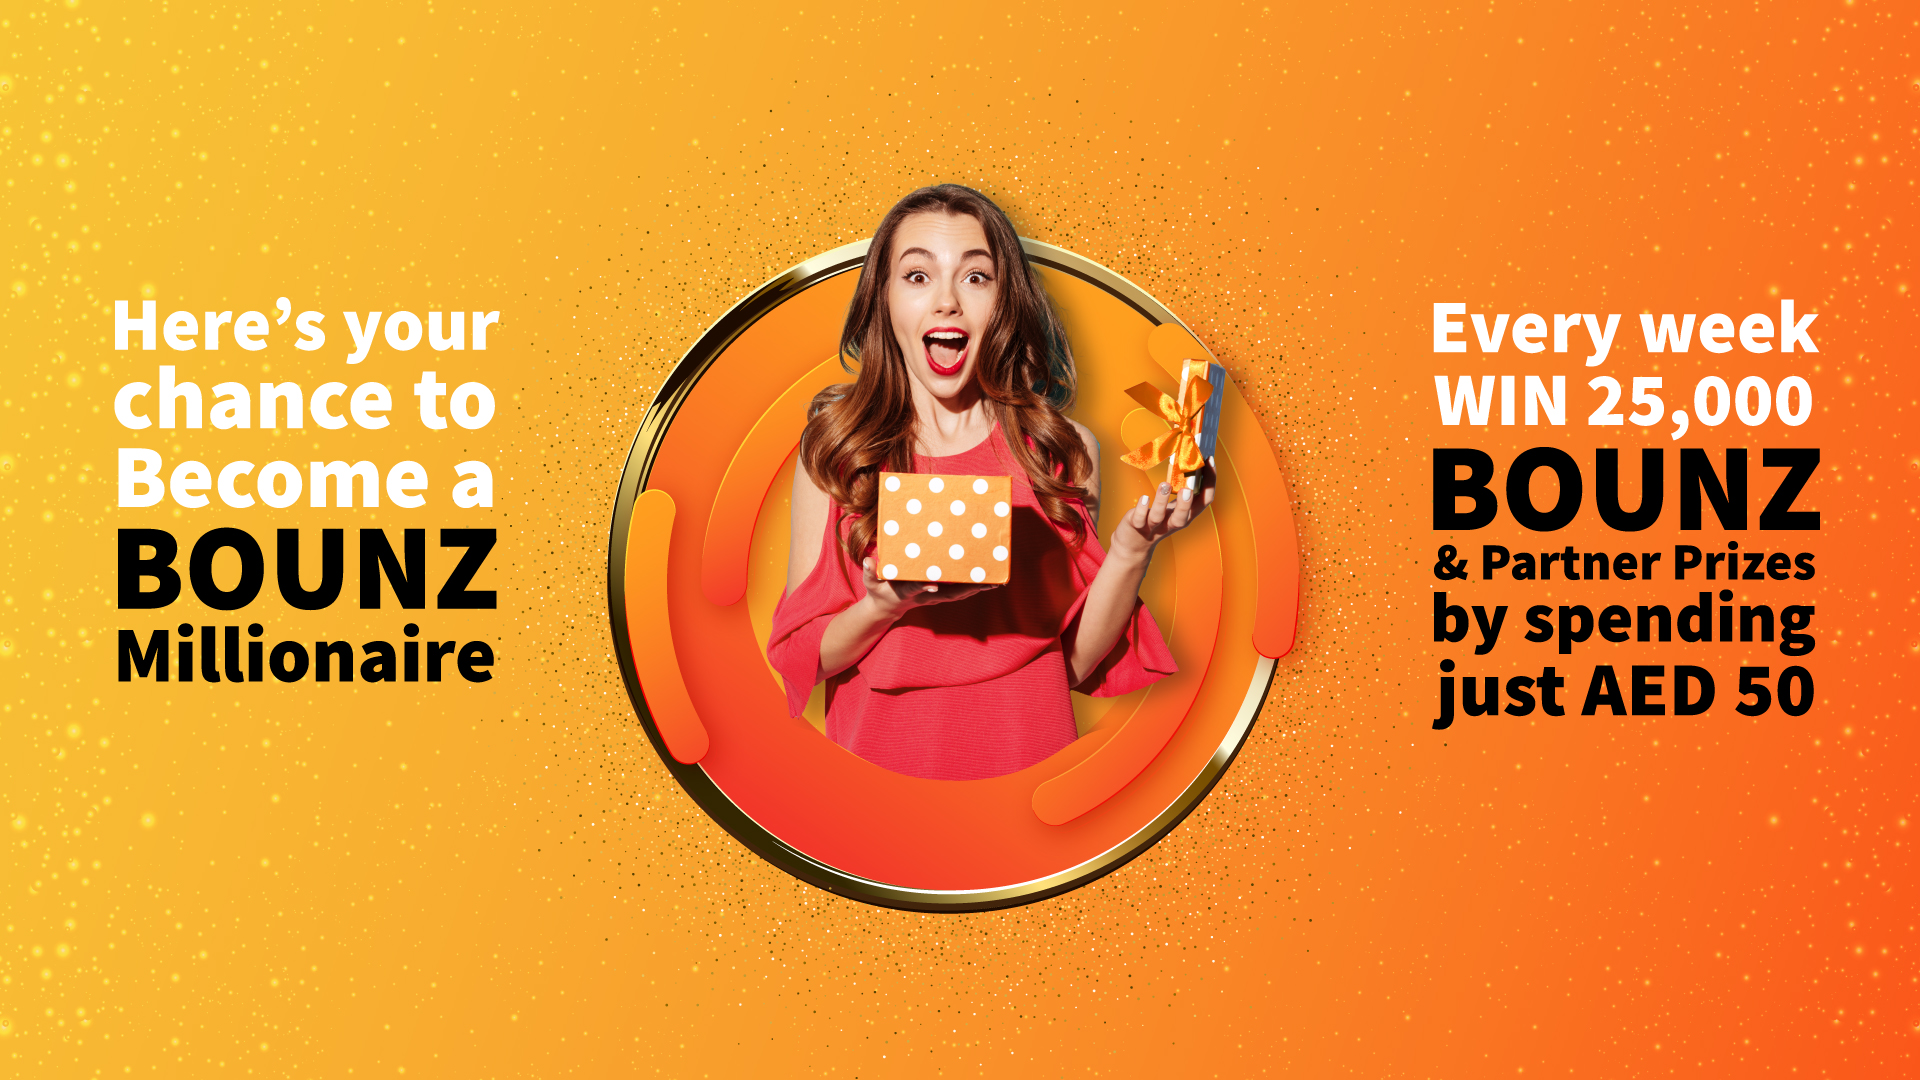 Download the Top Rewards App in Dubai and Get a Chance to Win 1 MILLION BOUNZ